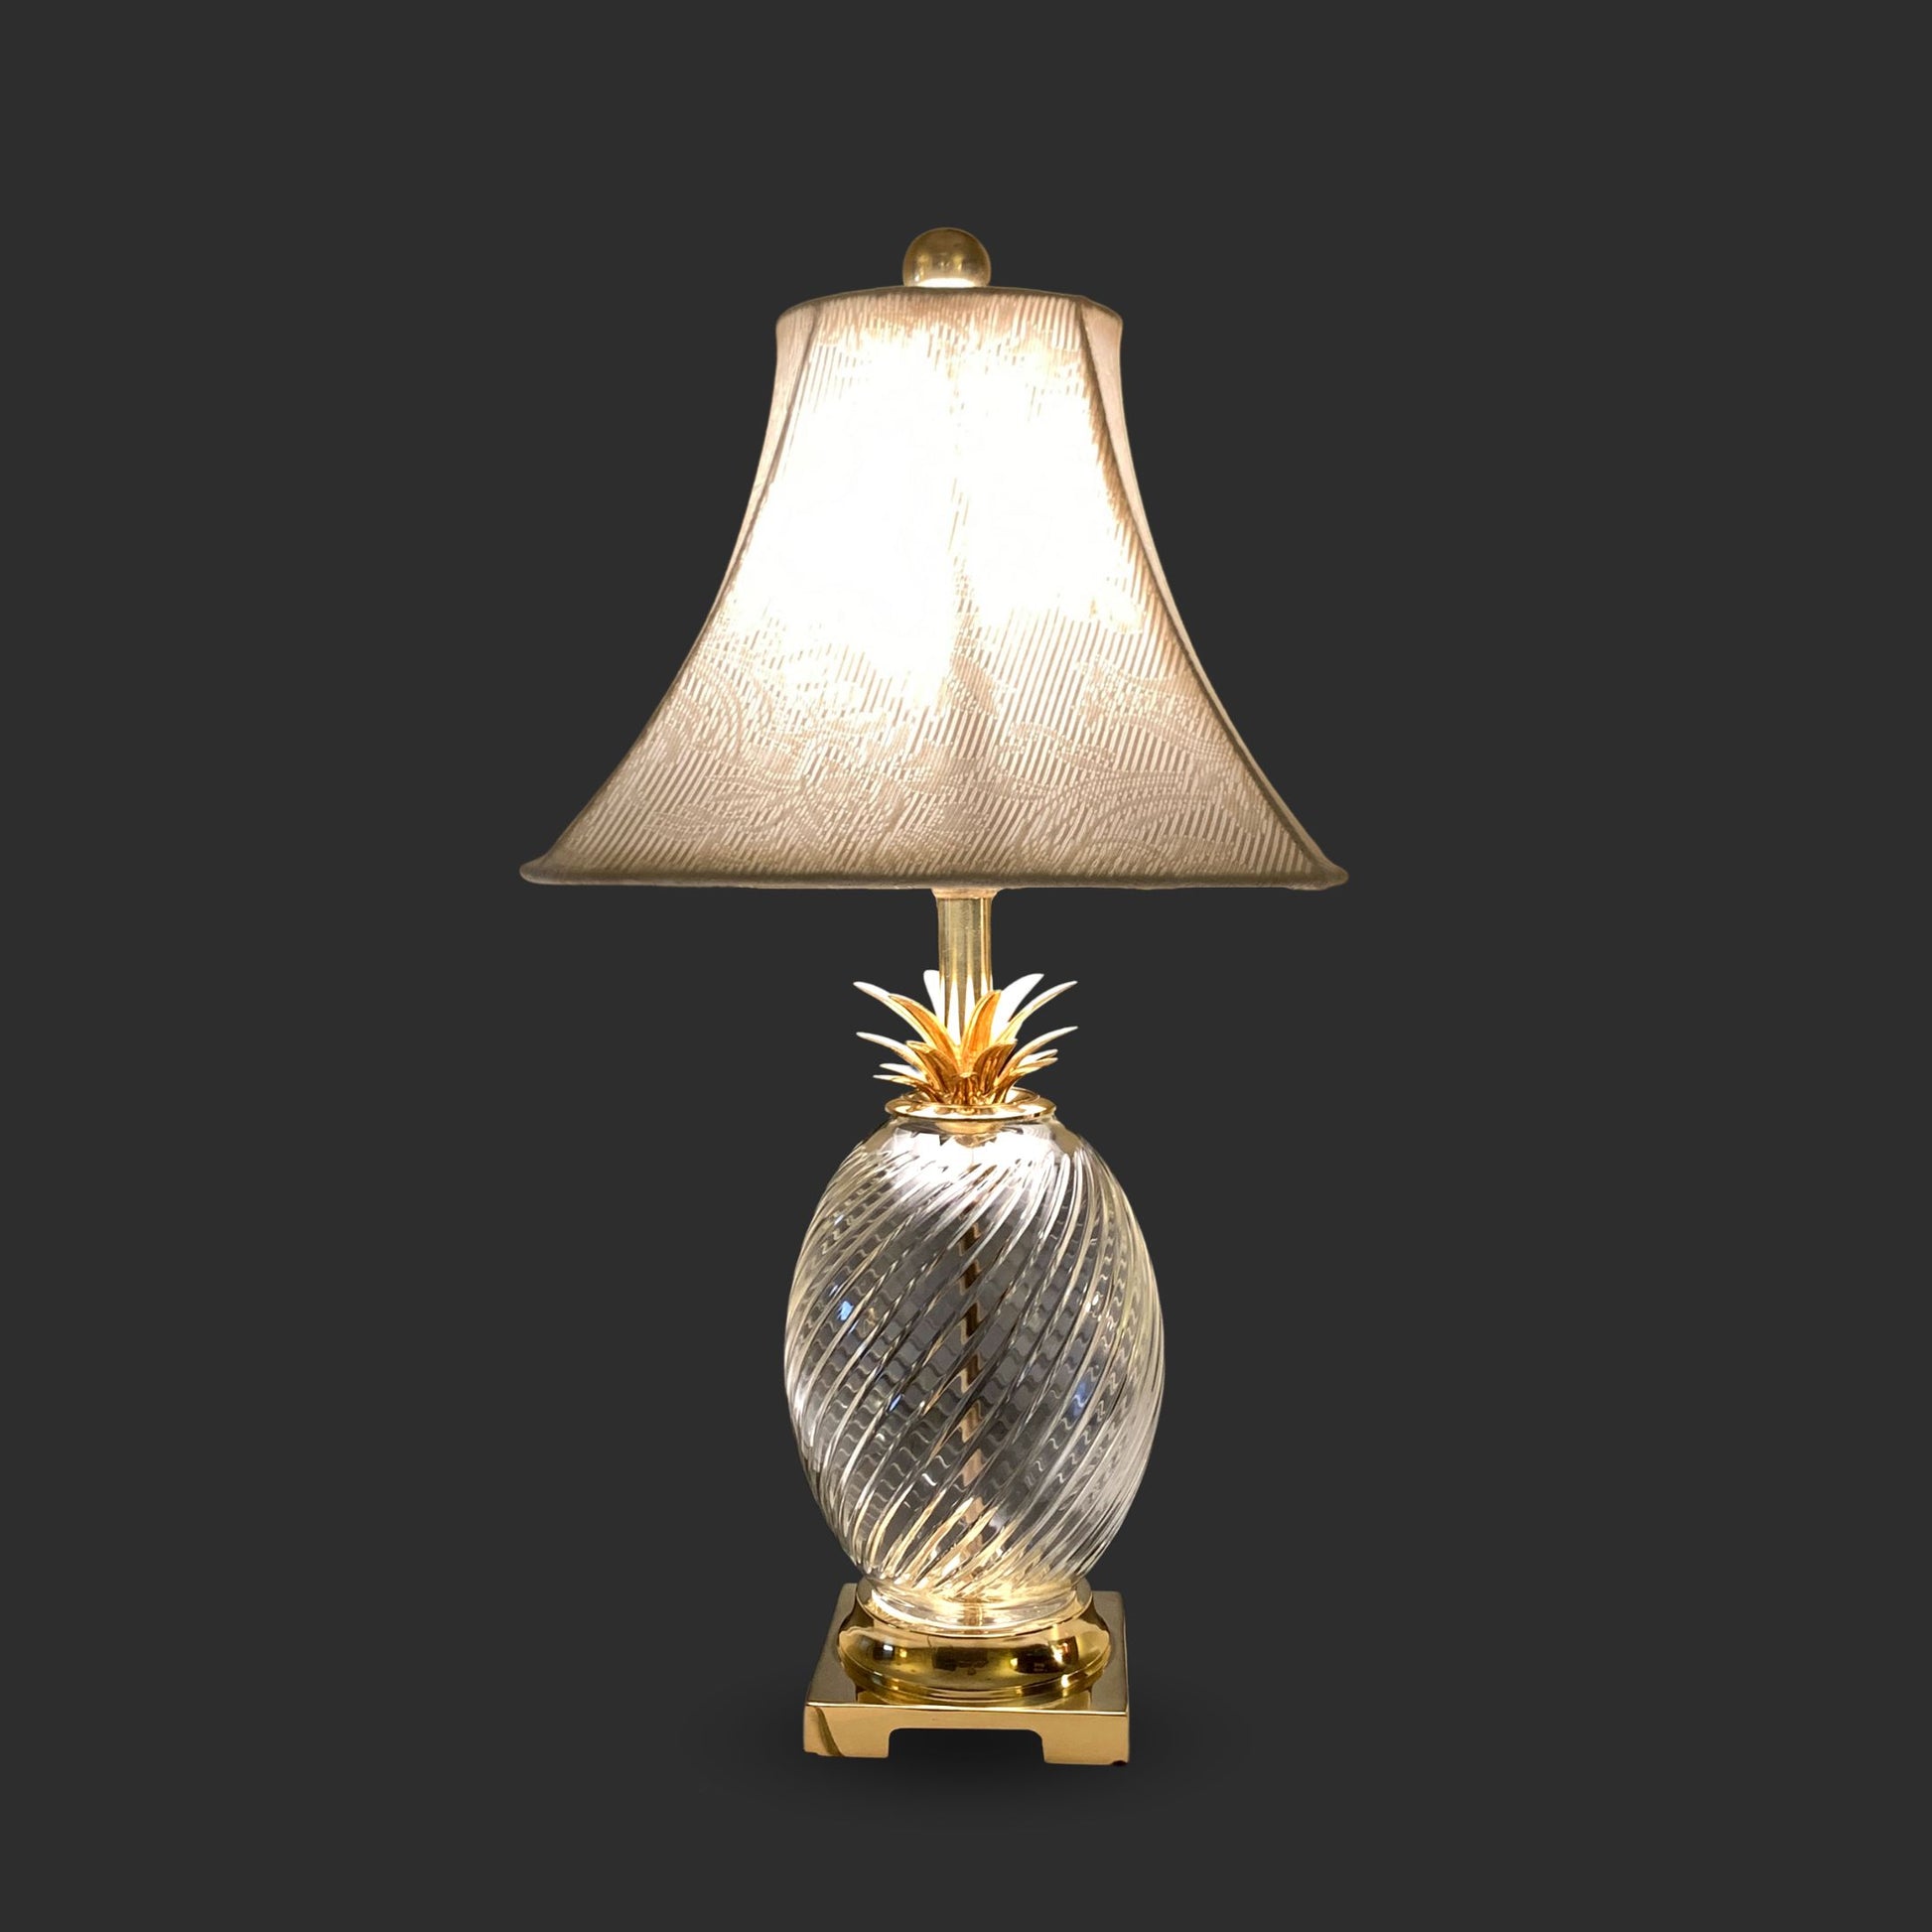 Dale Tiffany Crystal Brass Pineapple Table Lamp - Macy's